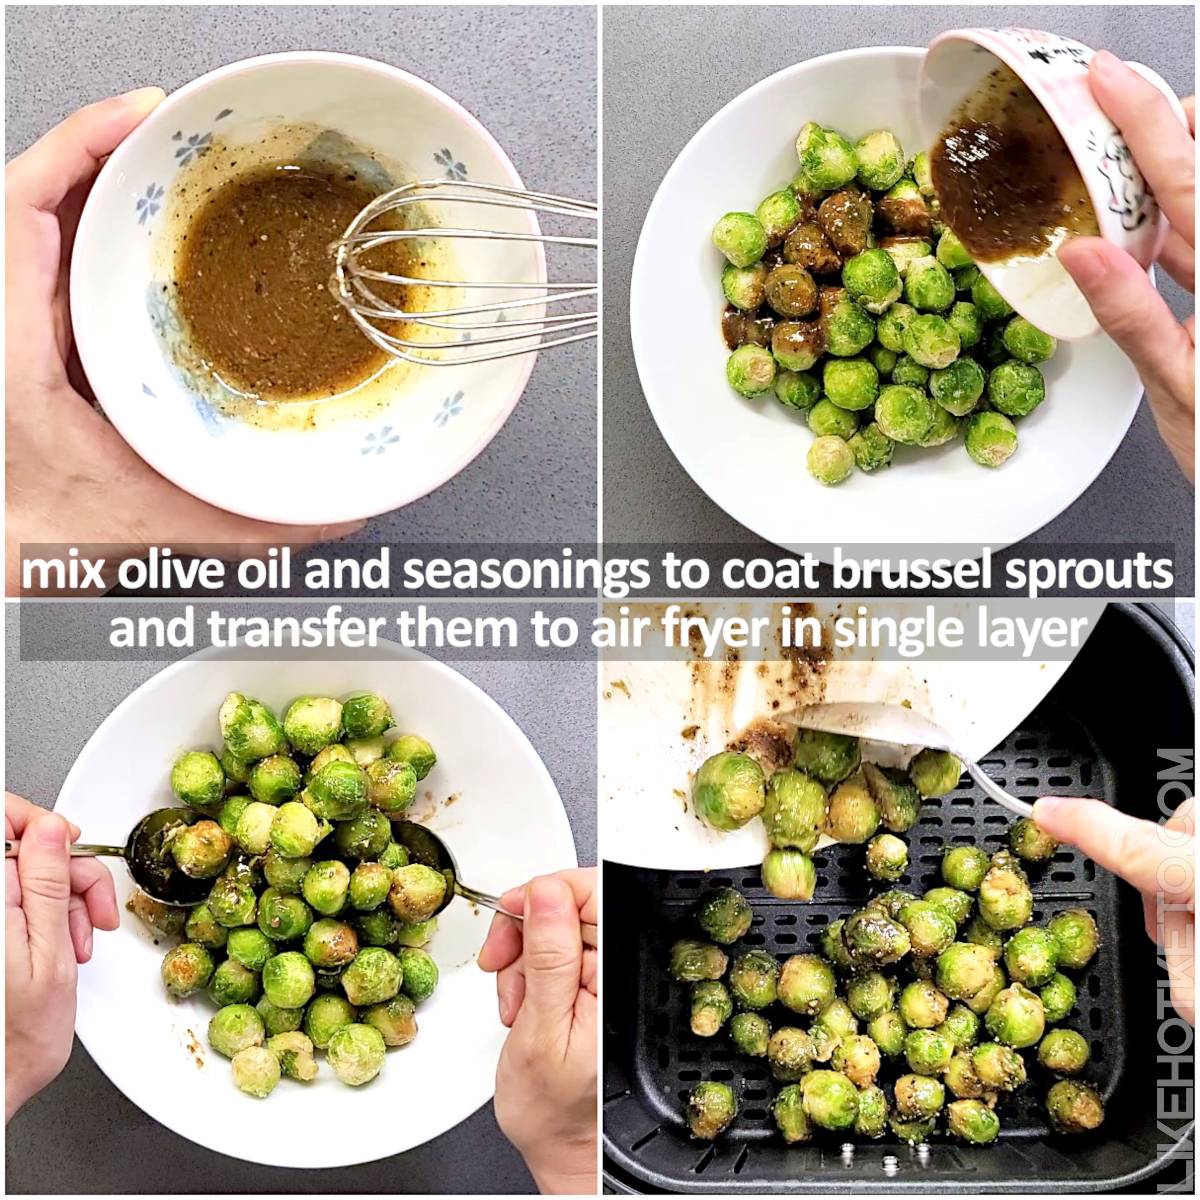 Step by step of how to prepare Brussel sprouts for air frying.